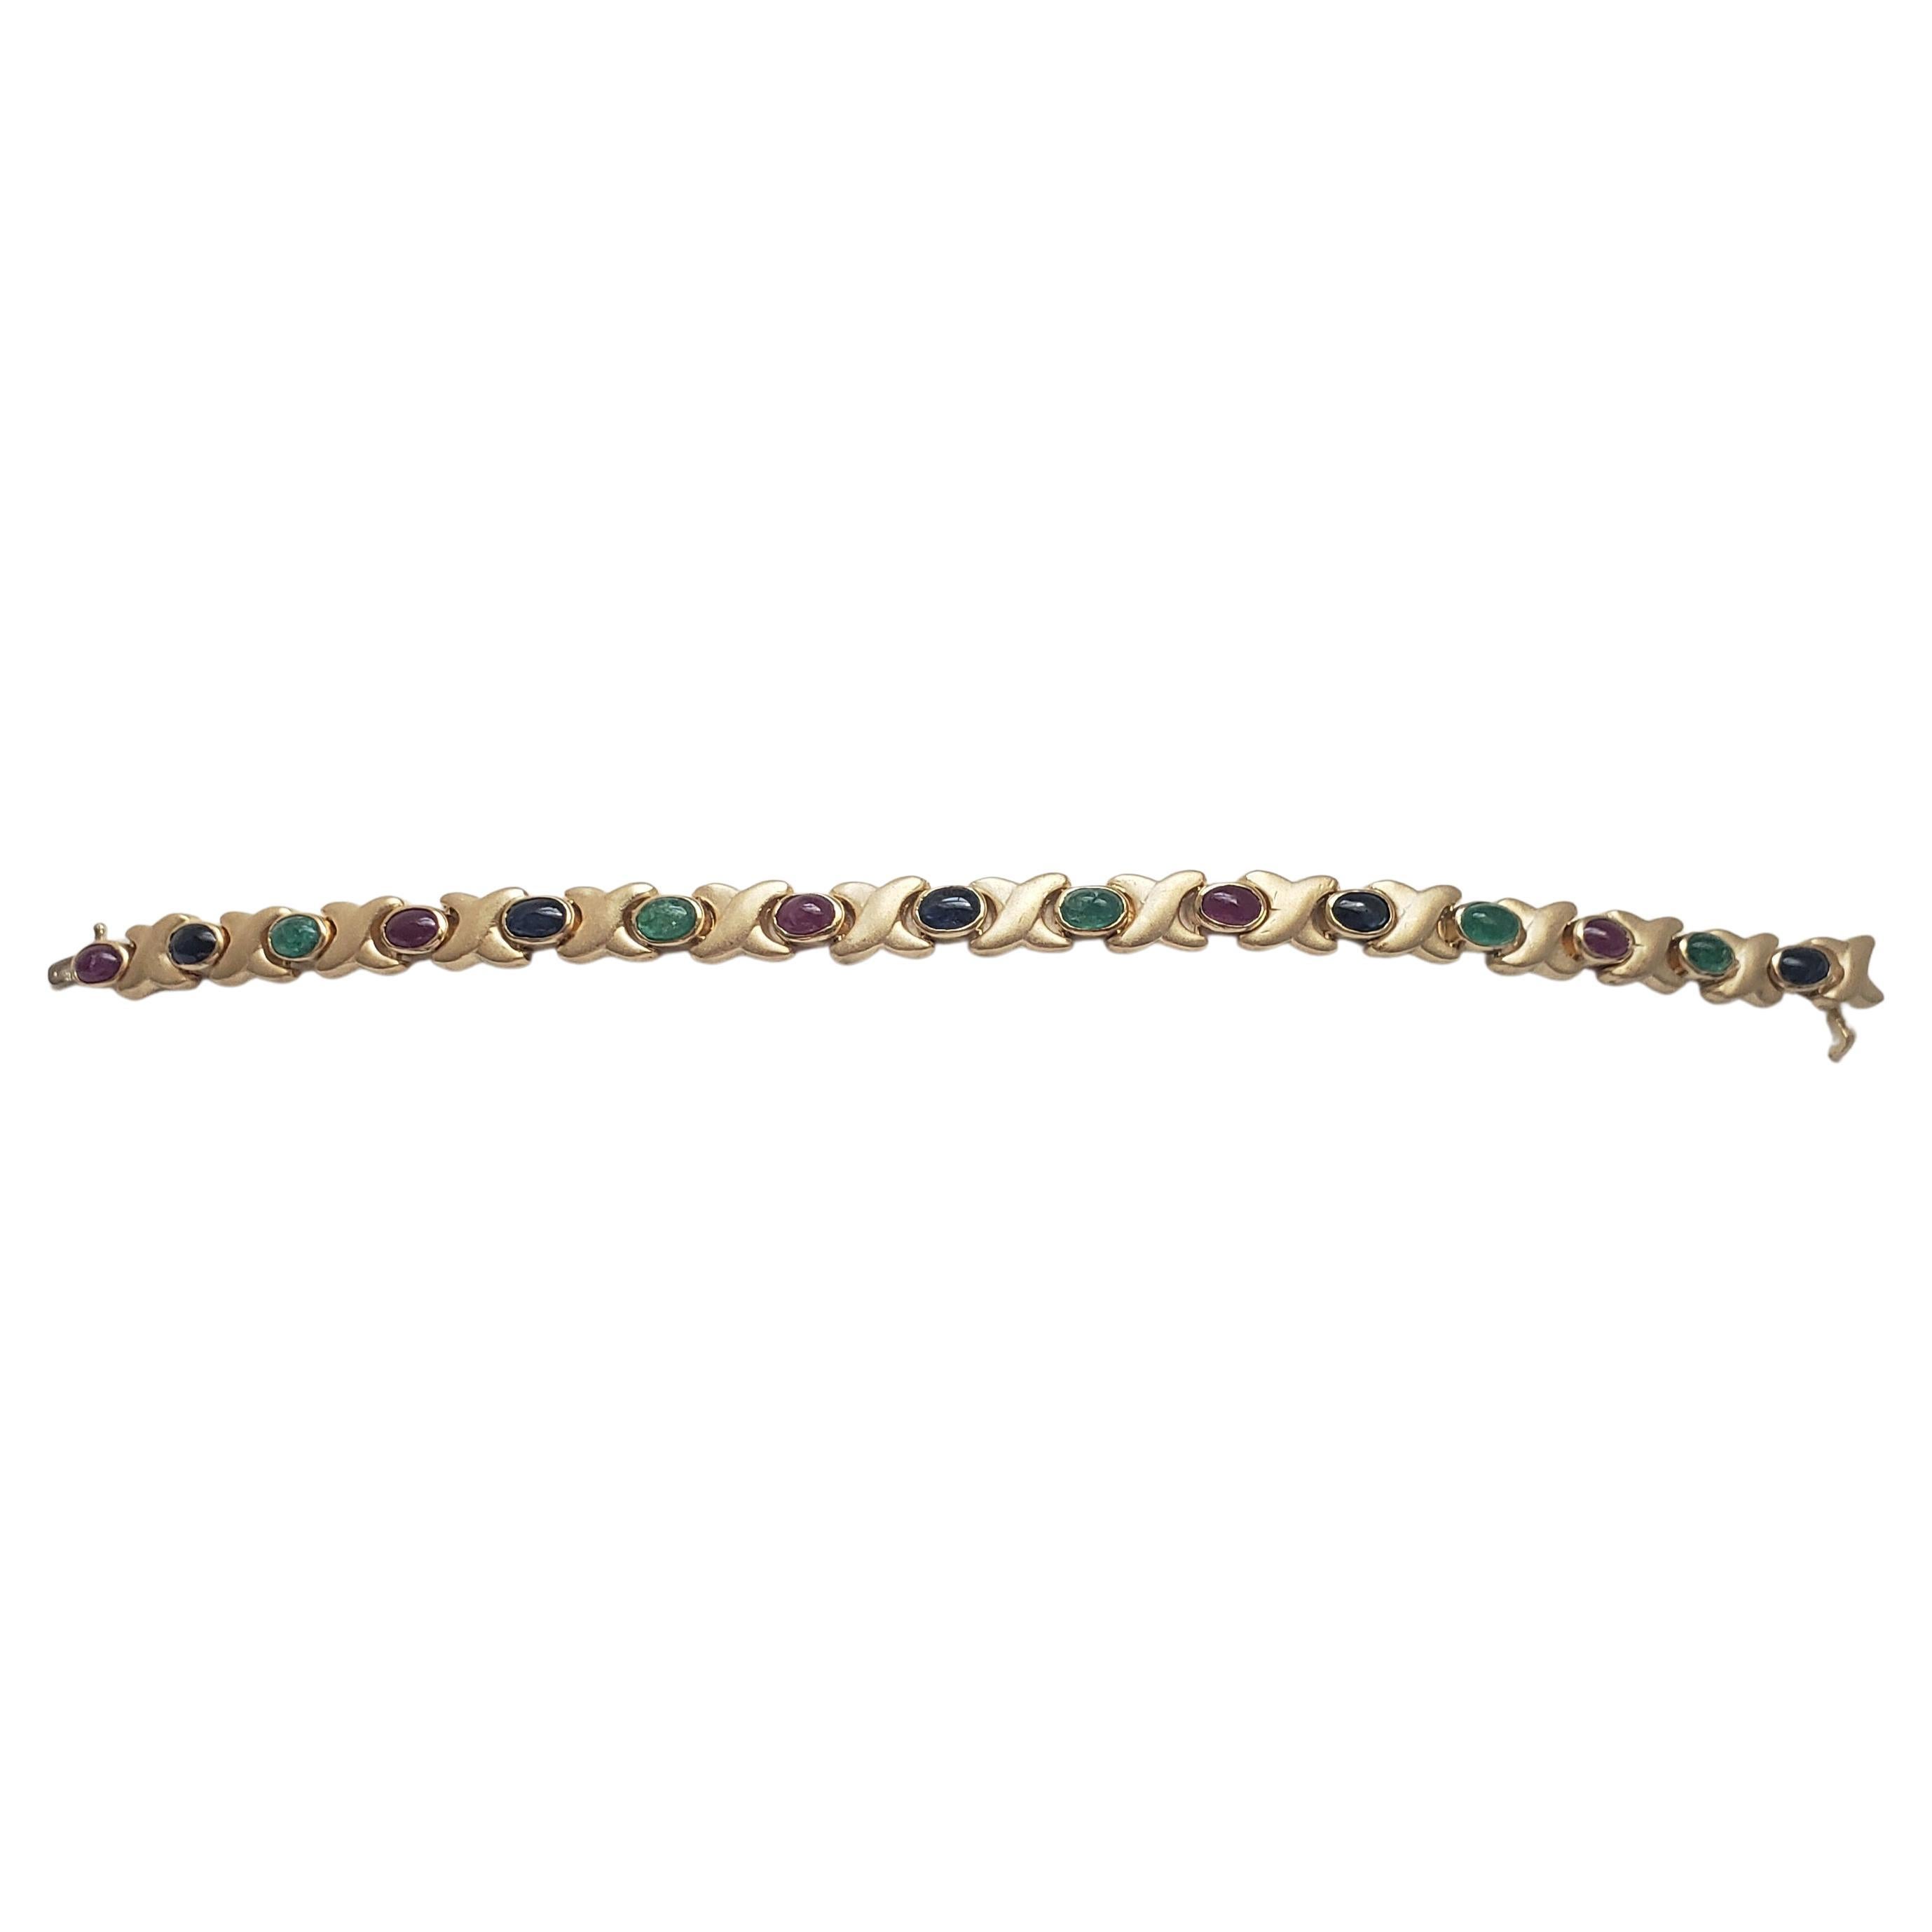 This stunning bracelet from LaFrancee is a true masterpiece. The 14k solid yellow gold setting gives it a luxurious feel, while the natural ruby, sapphire, and emerald gemstones add a touch of elegance.

The colors of the main stones are blue for